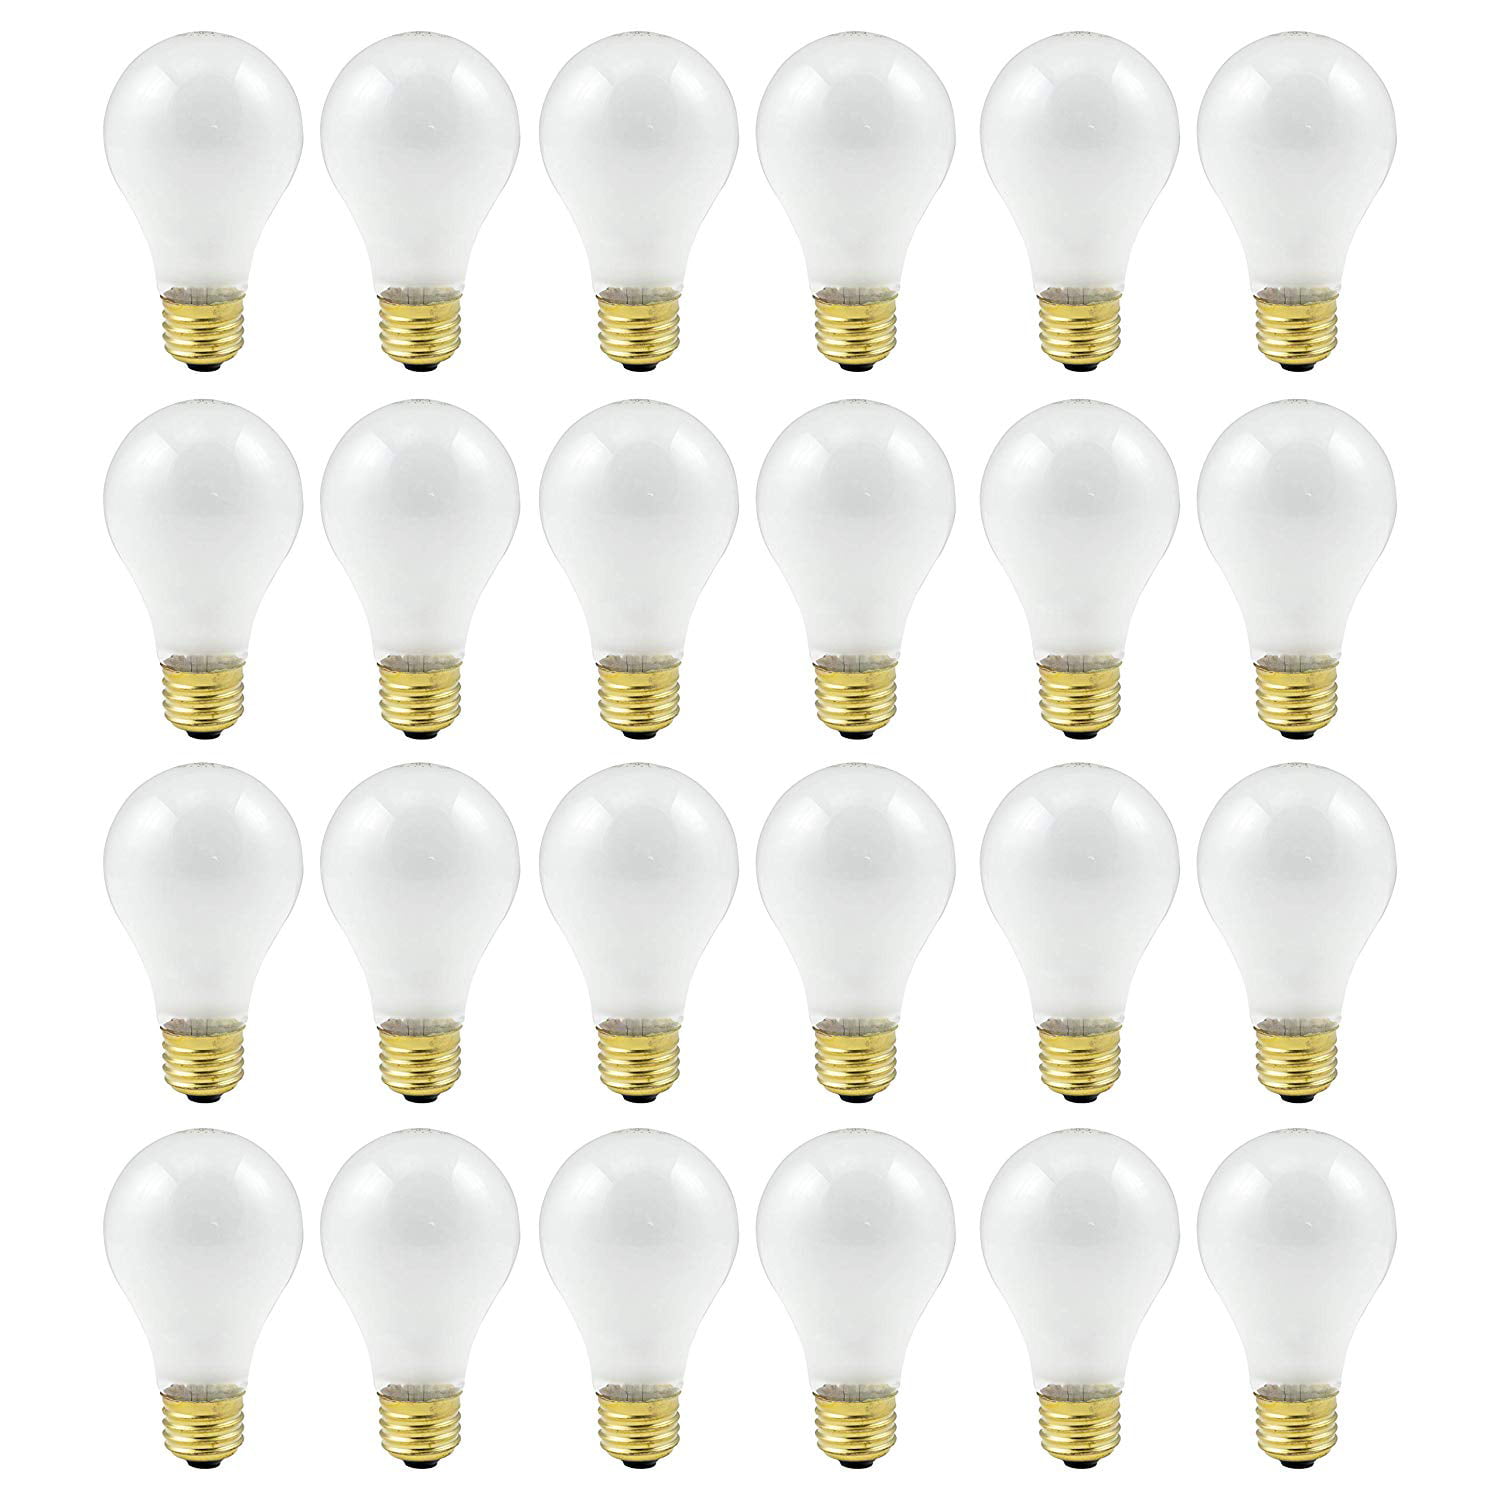 5000 Hour Incandescent Long Term Care Lighting 24 Pack by GoodBulb Frosted Medium Base 130 Volt Rough Service 6O Watt A19 Light Bulb